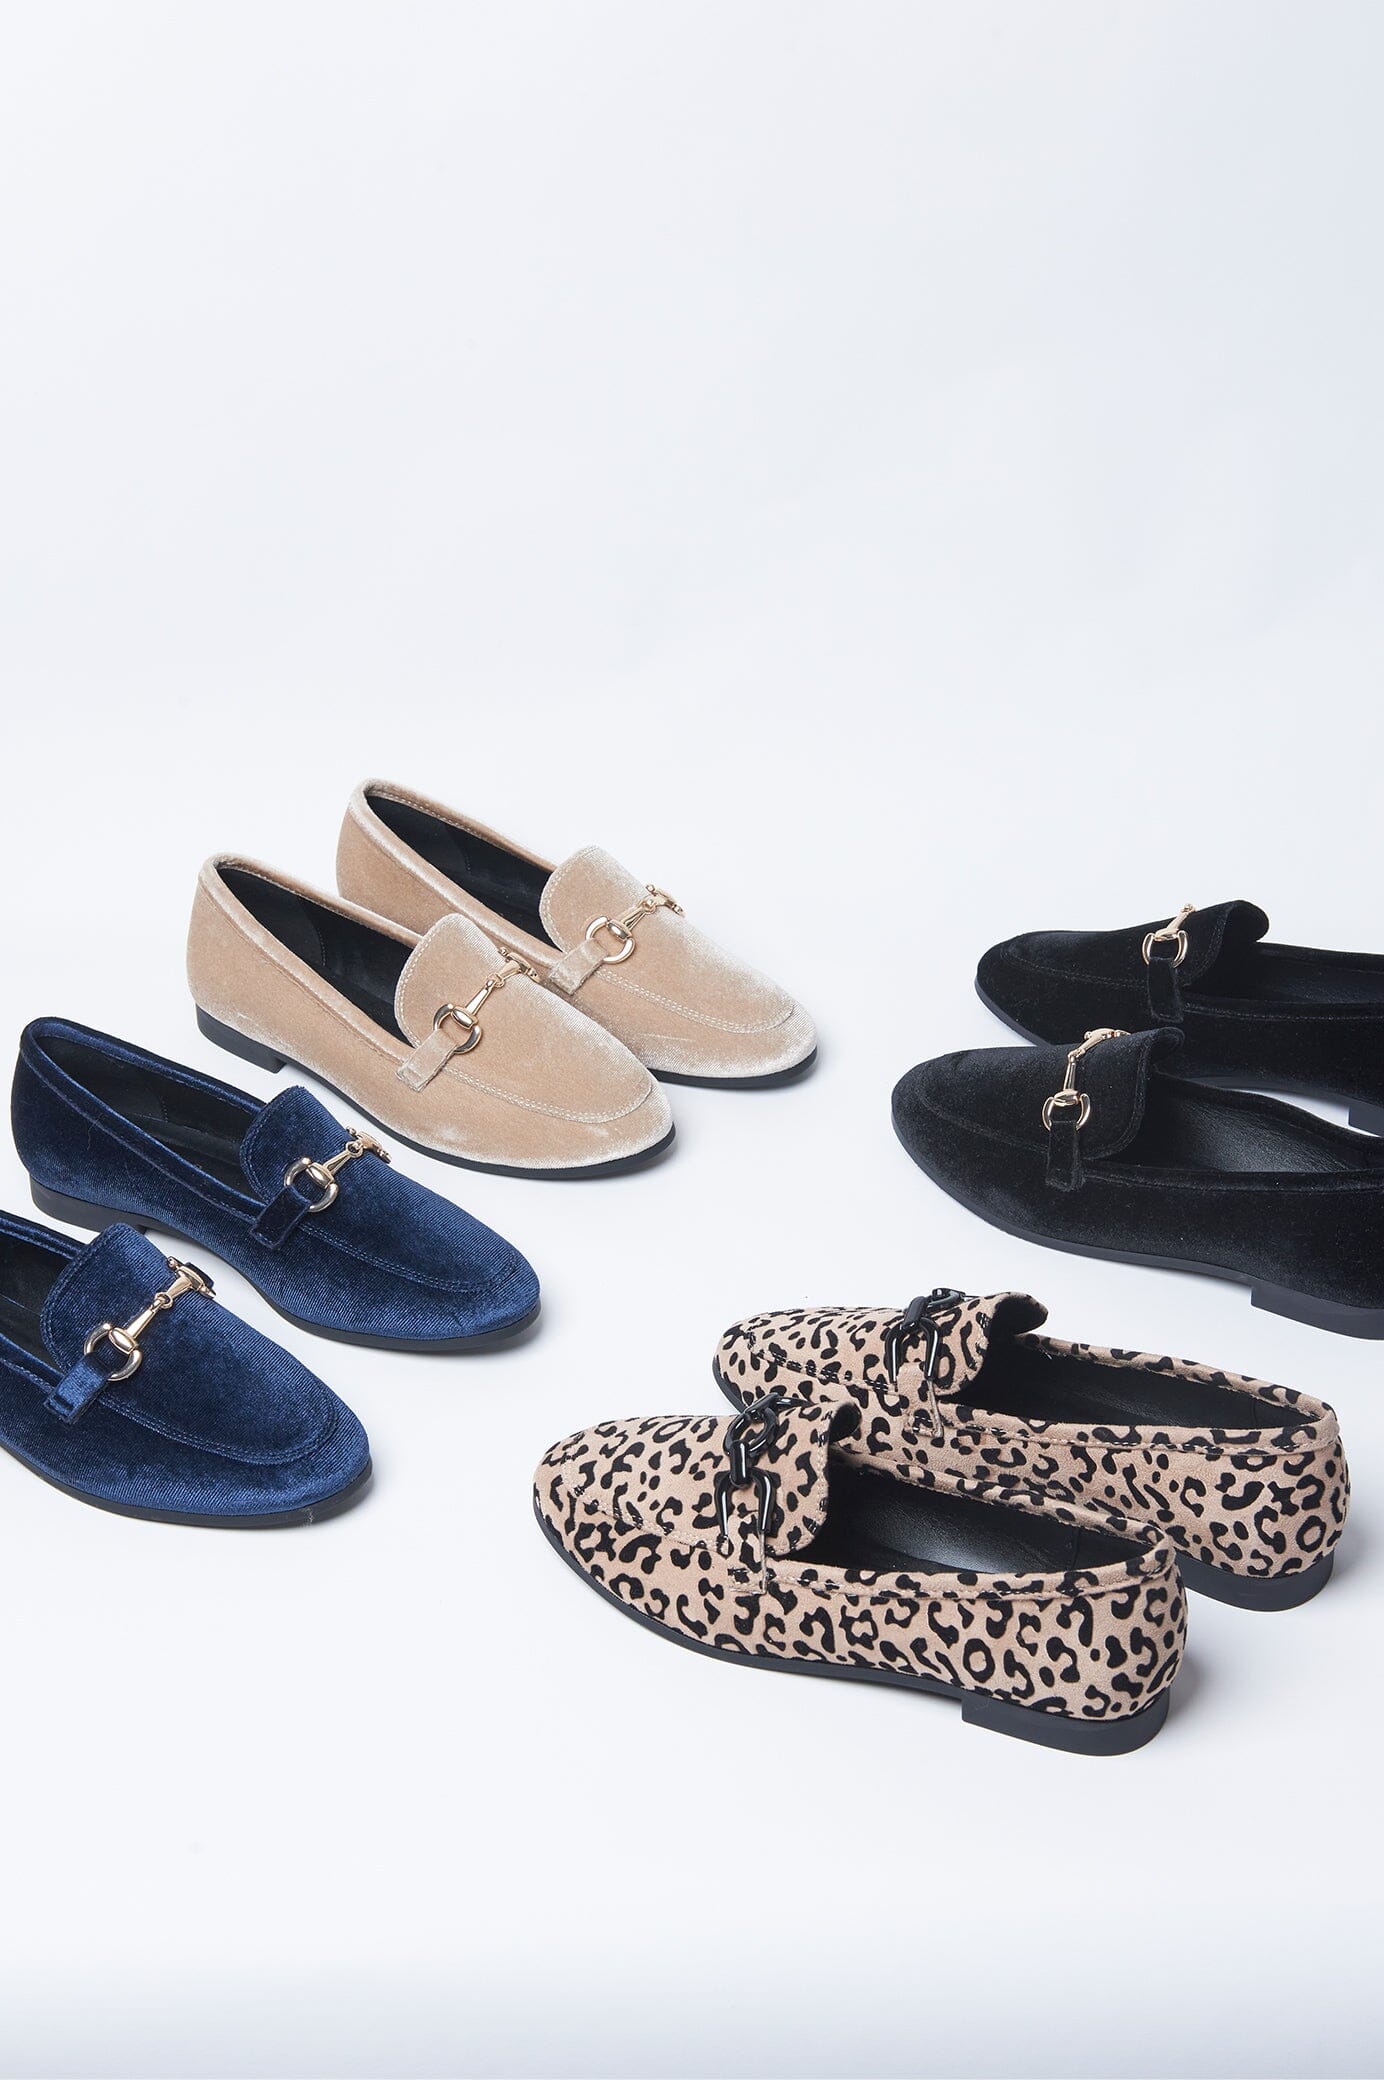 Virginia Loafers Animal Print Shoes